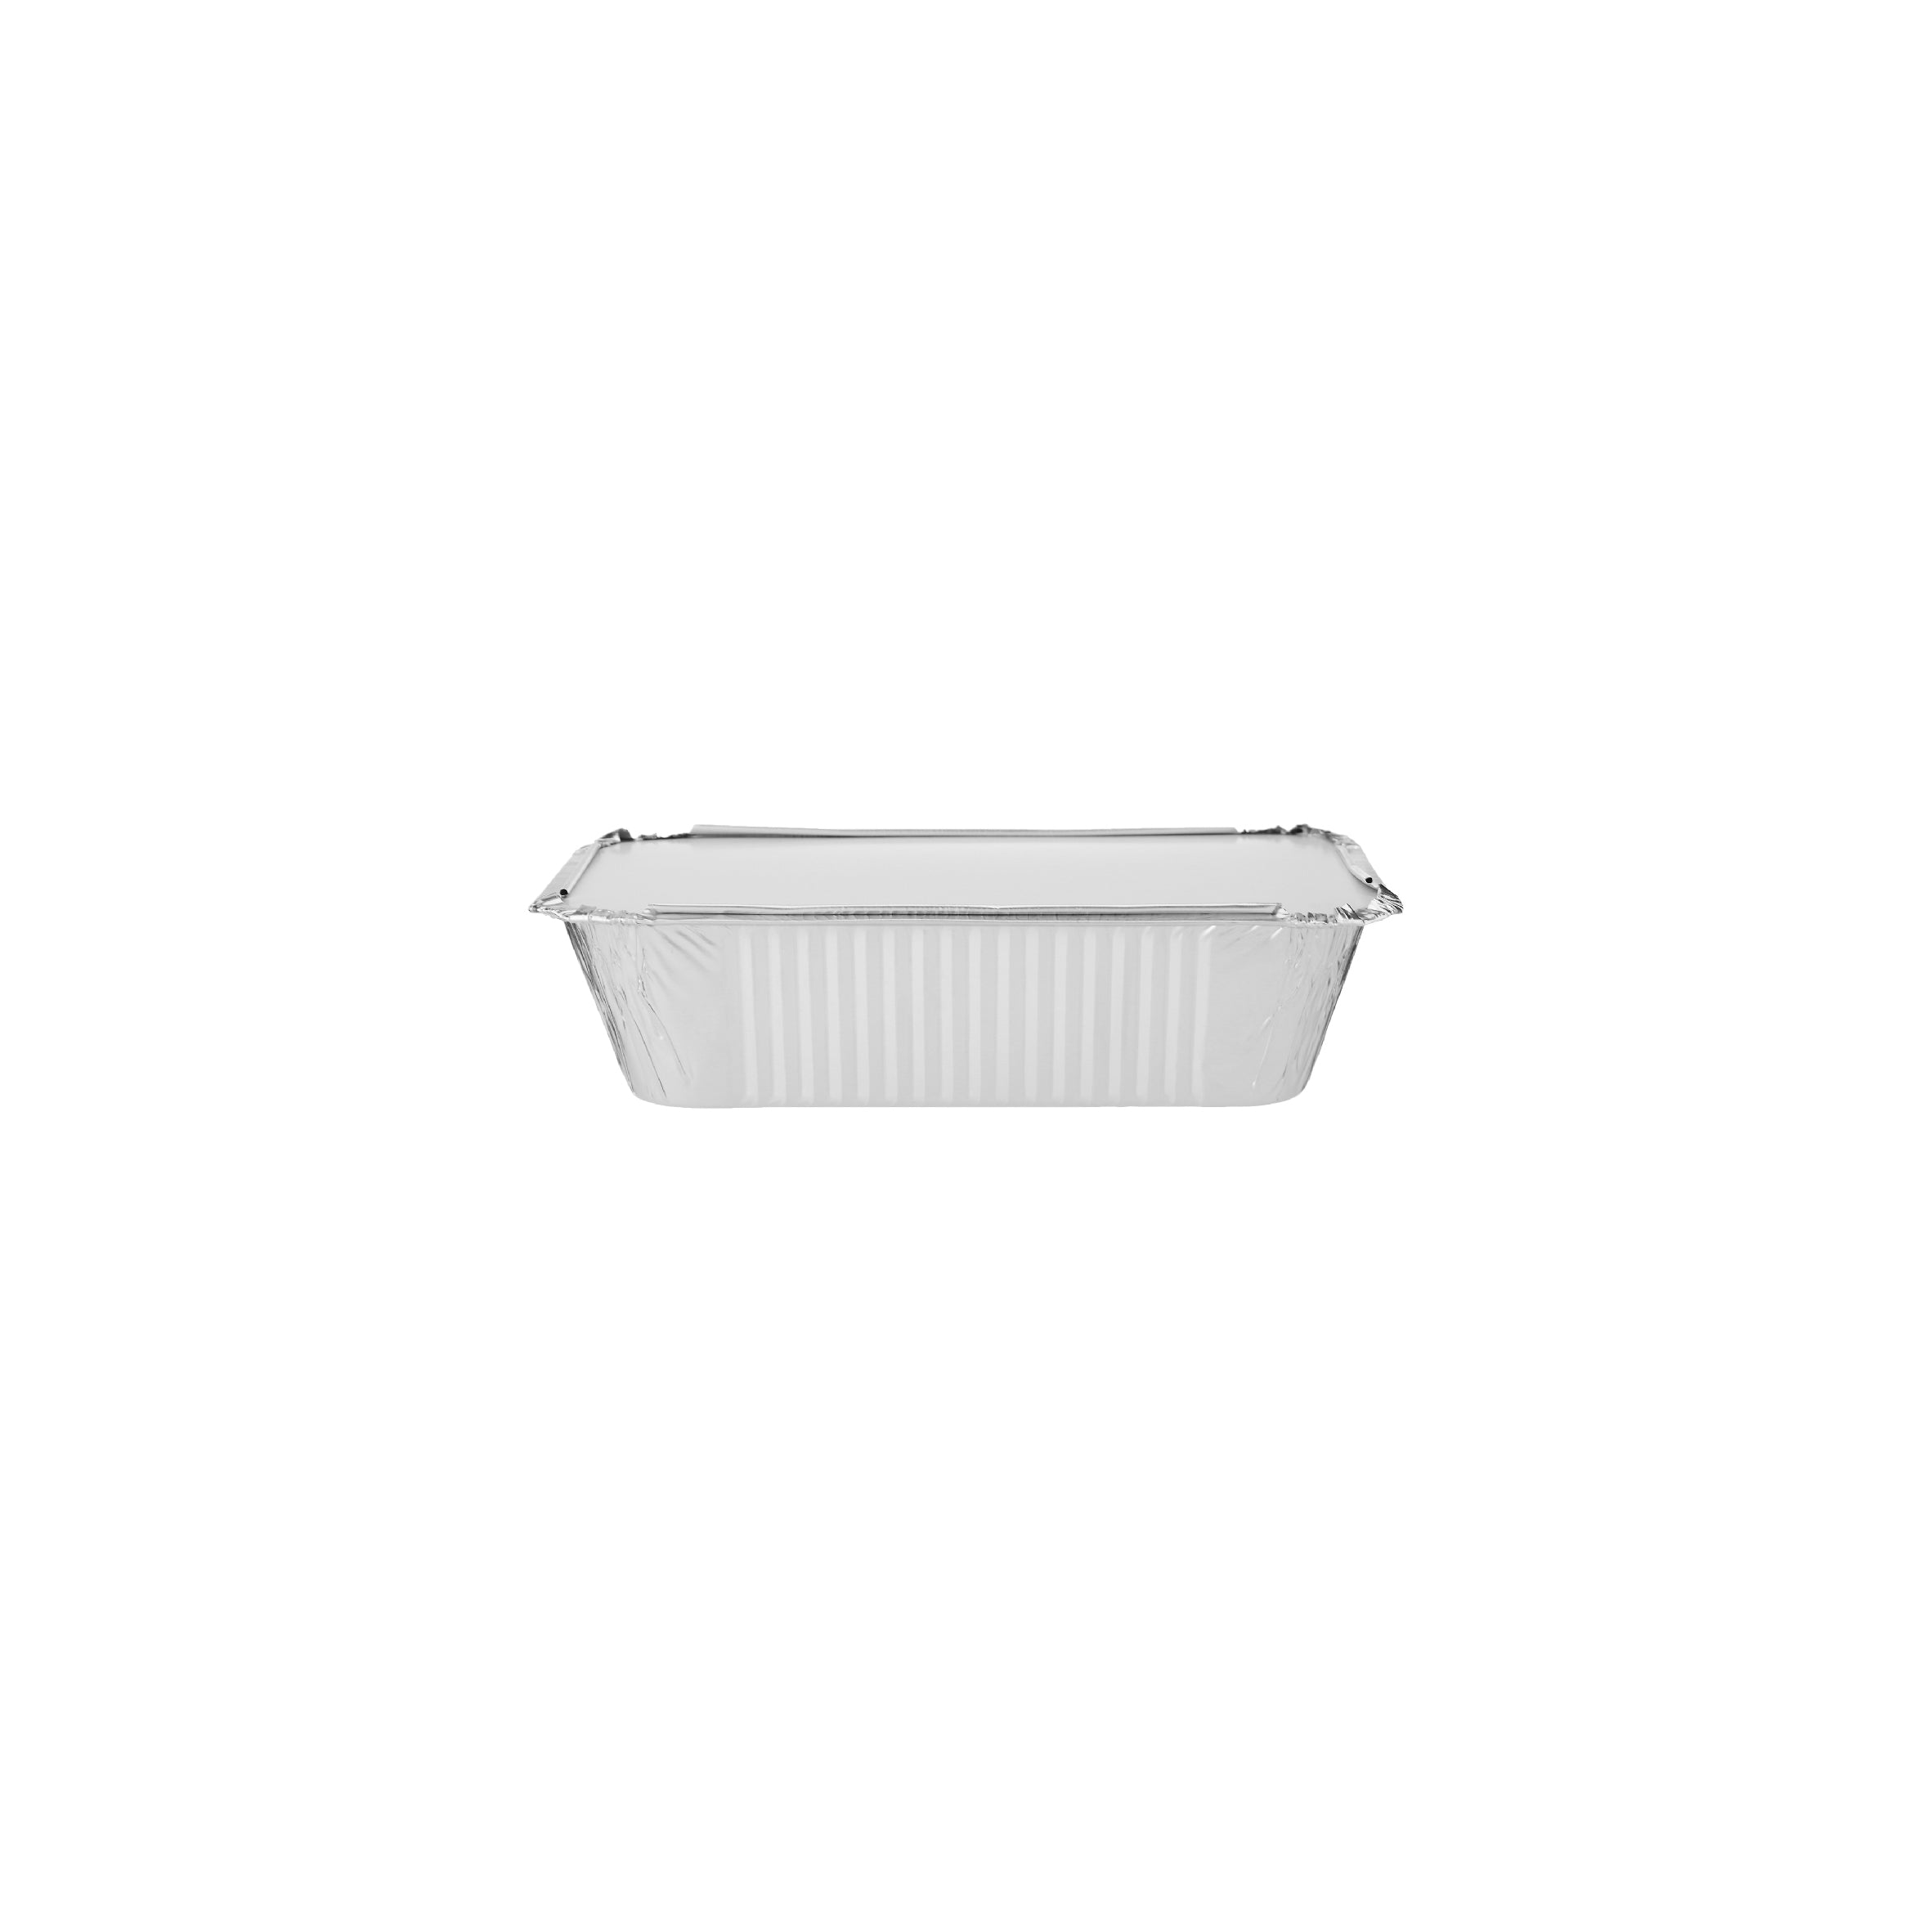 Aluminium takeaway container with lid 8367 - Hotpack Global